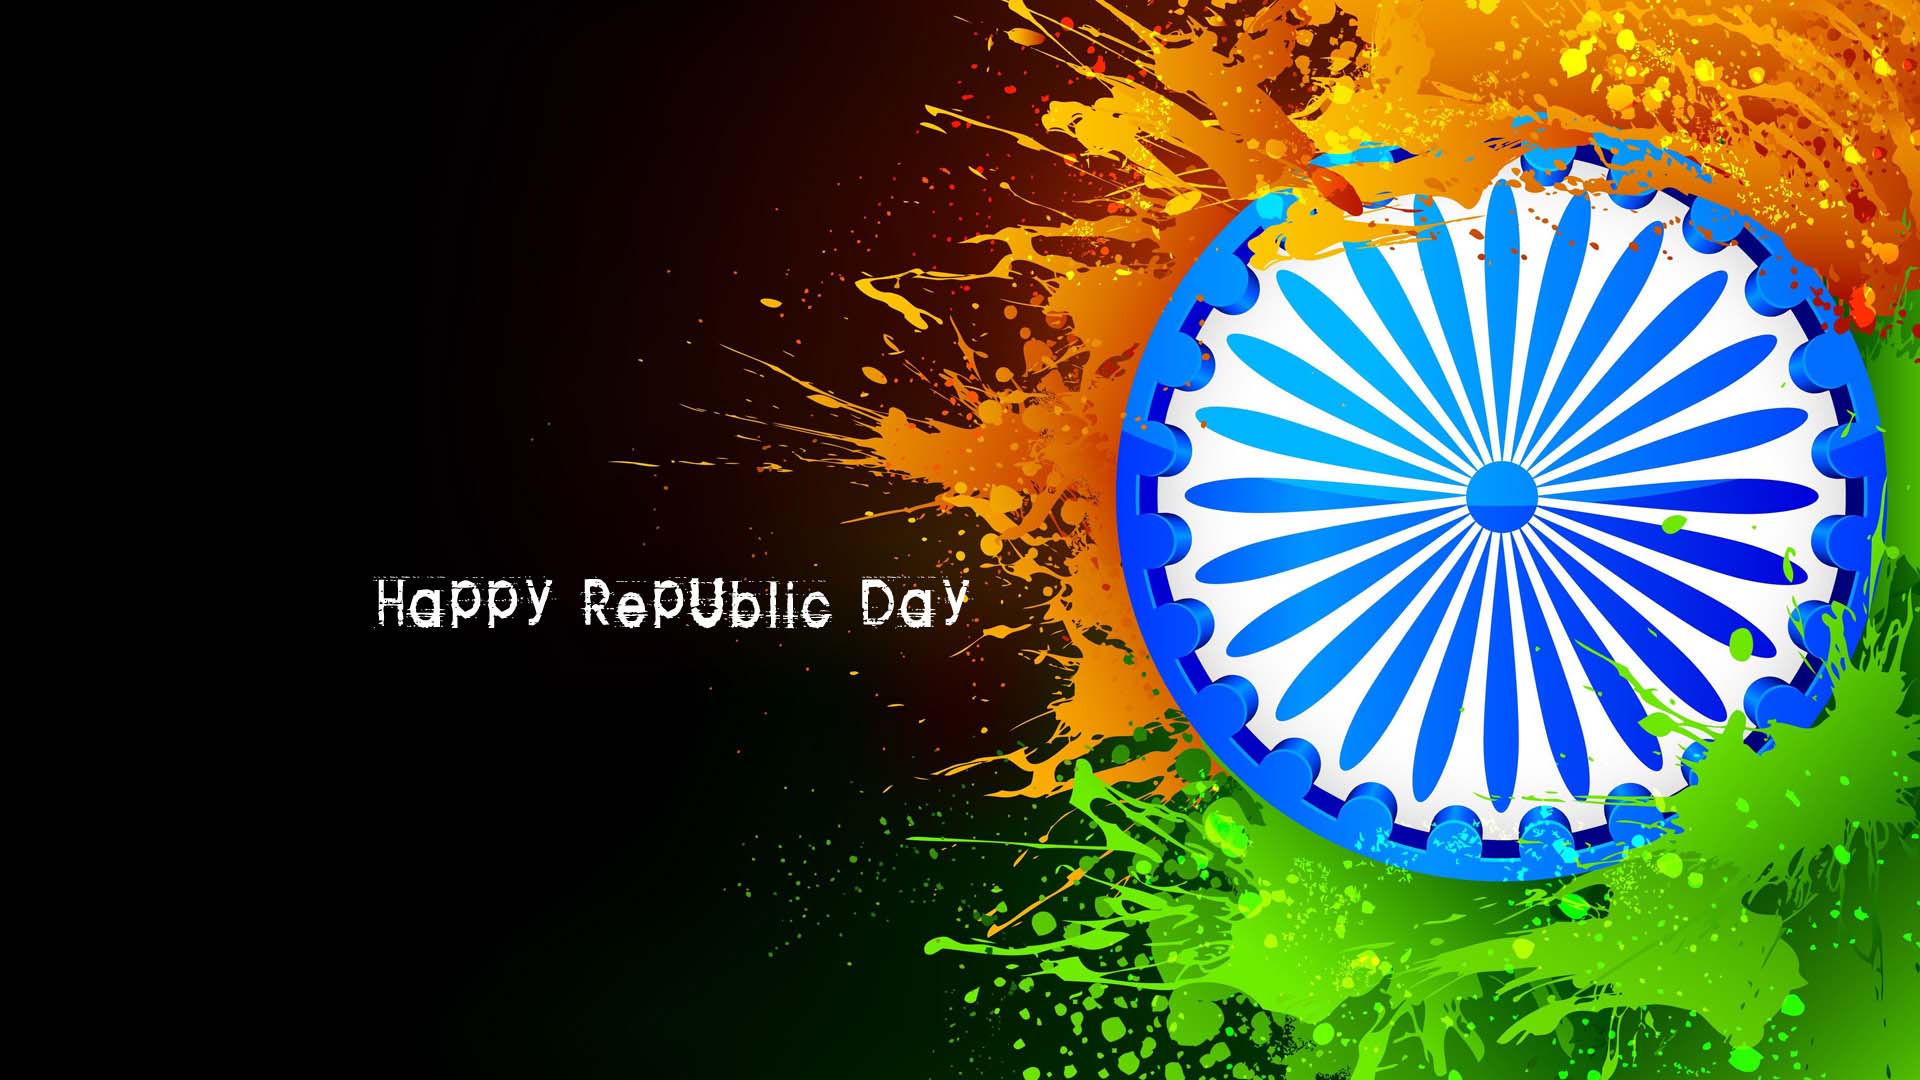 Indian flag wallpaper for happy republic day hd ã